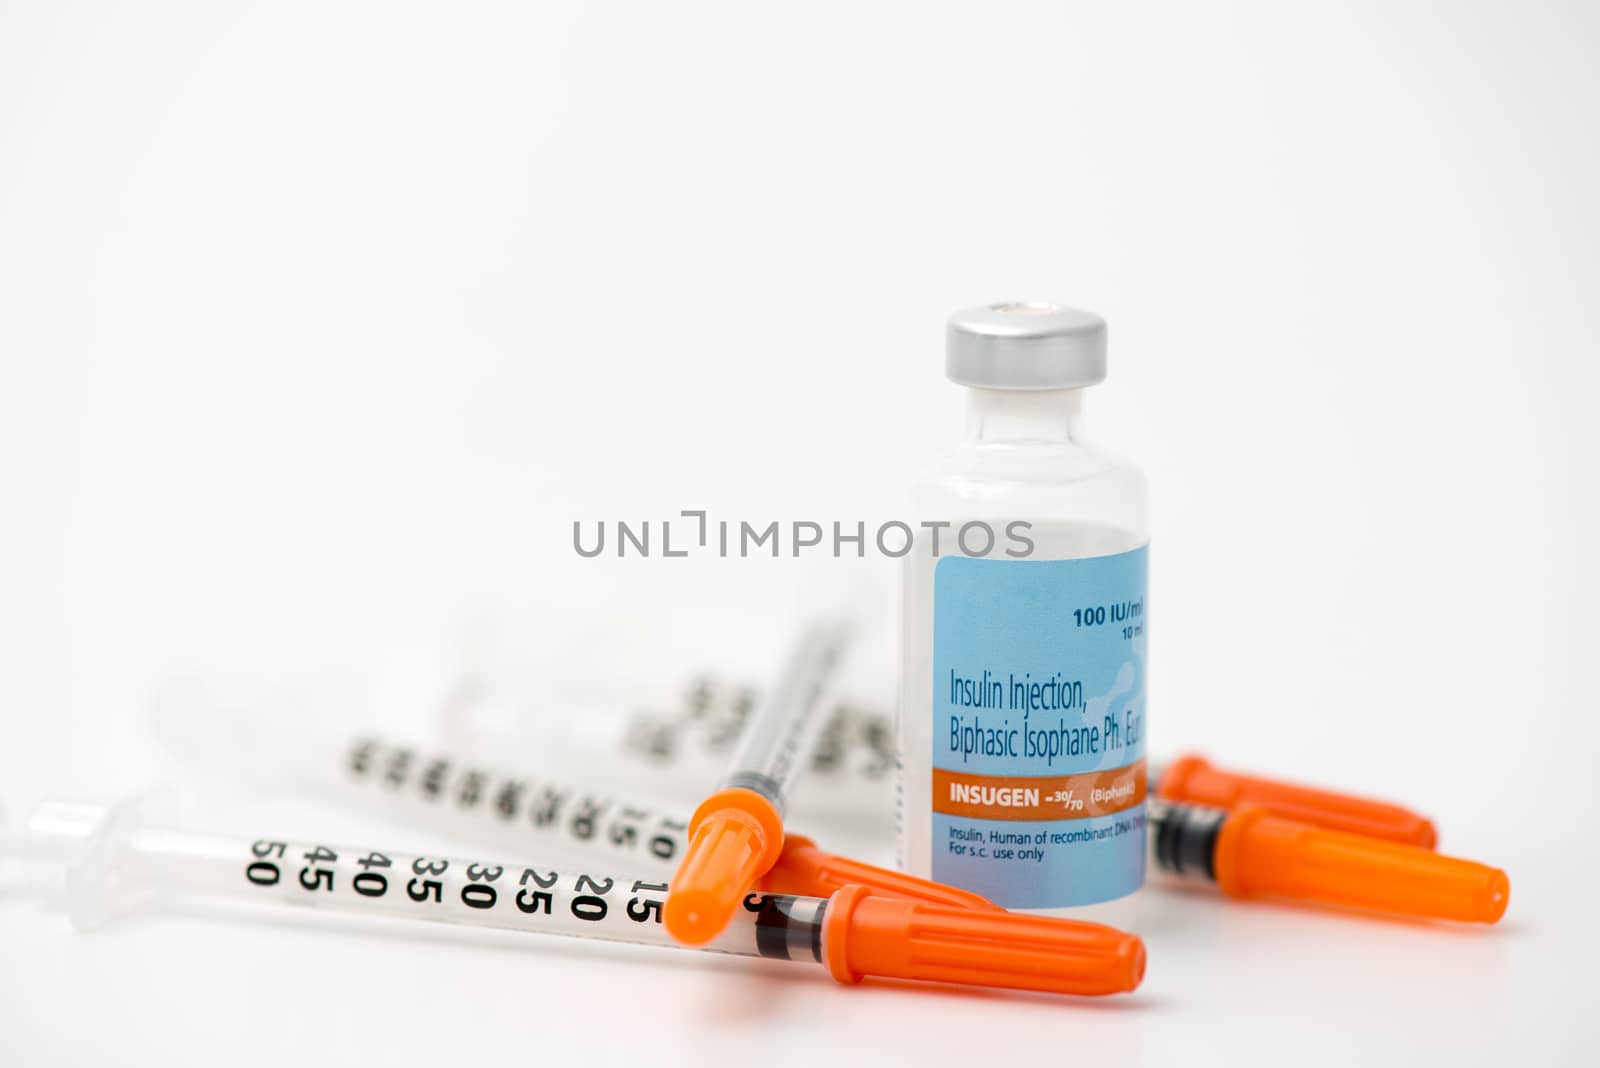 Insulin ampoule with syringe lie by antpkr